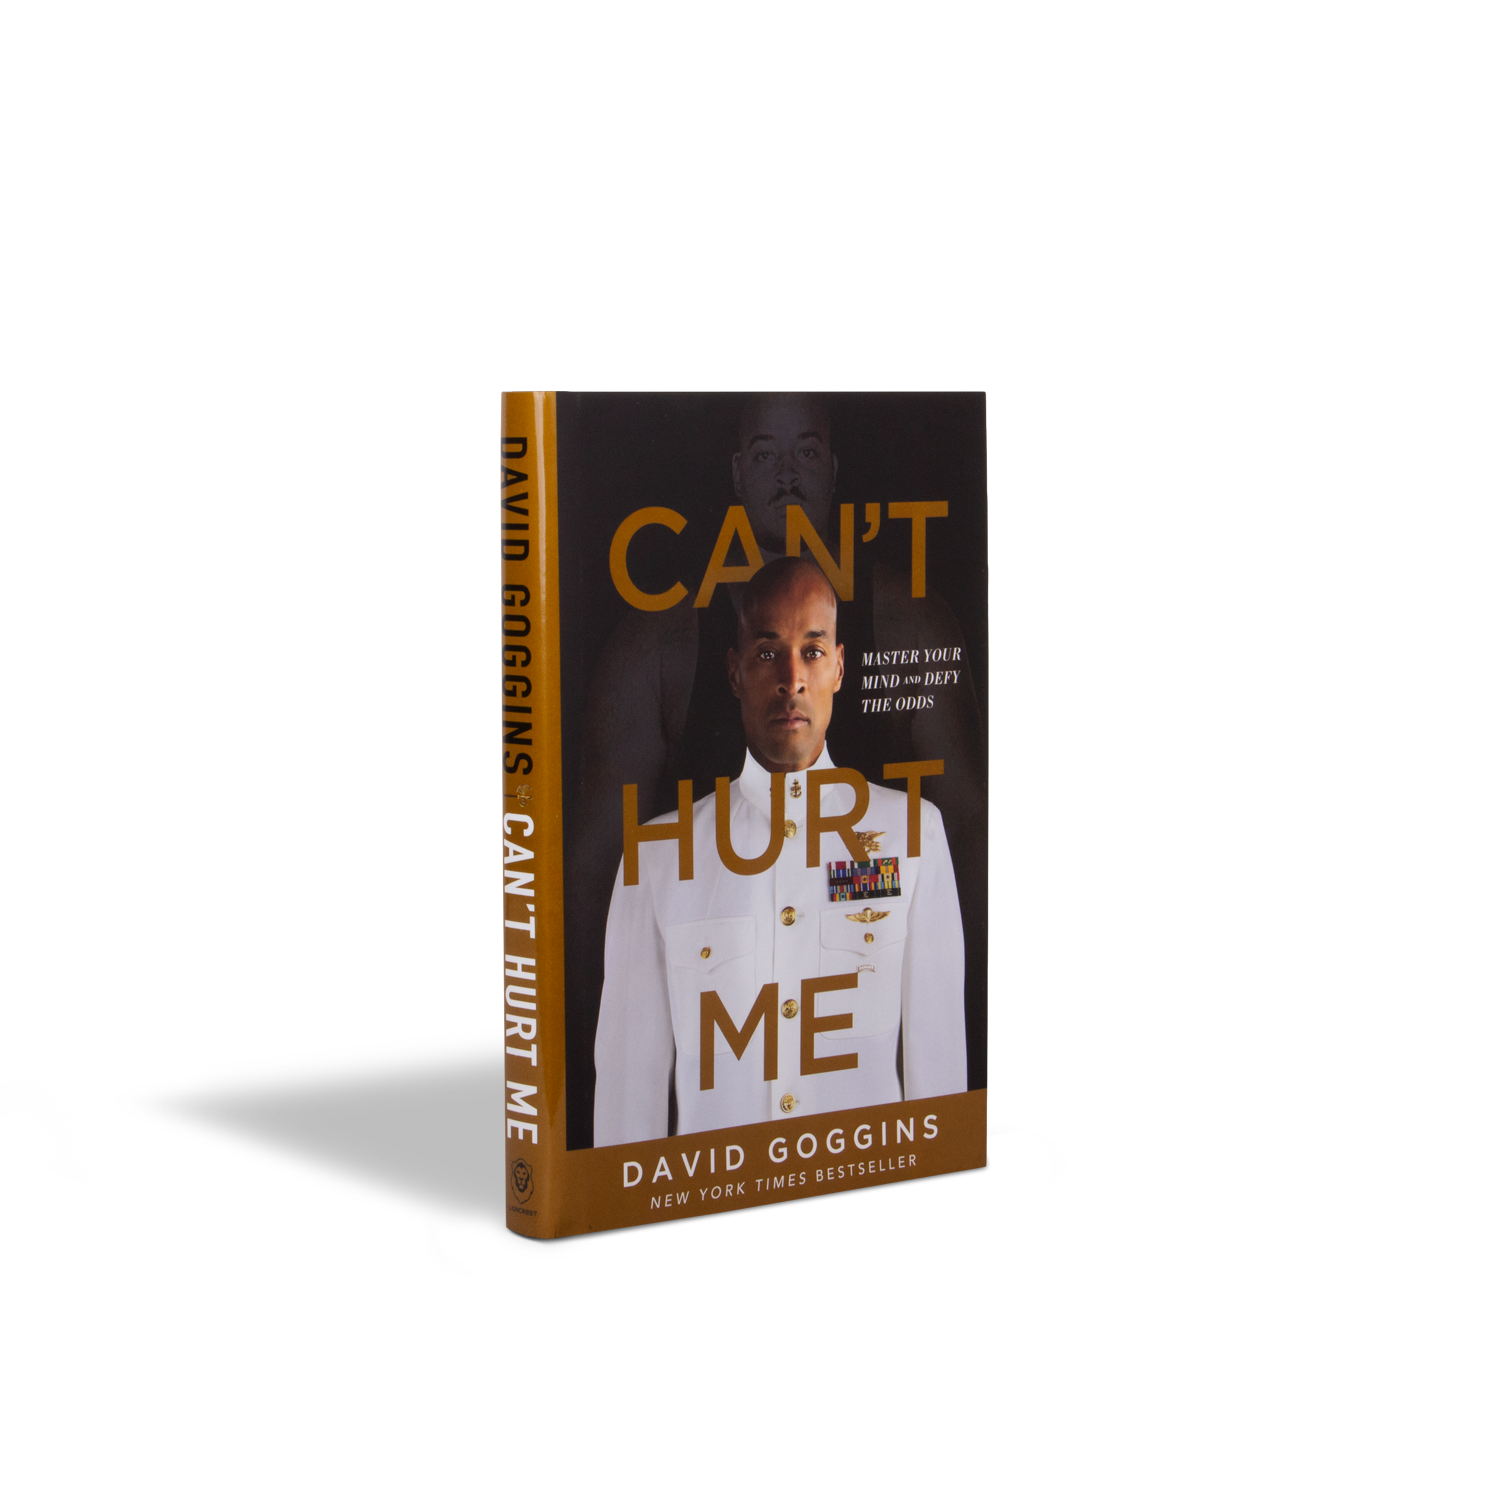 Autographed Hardcover Copy of Can't Hurt Me